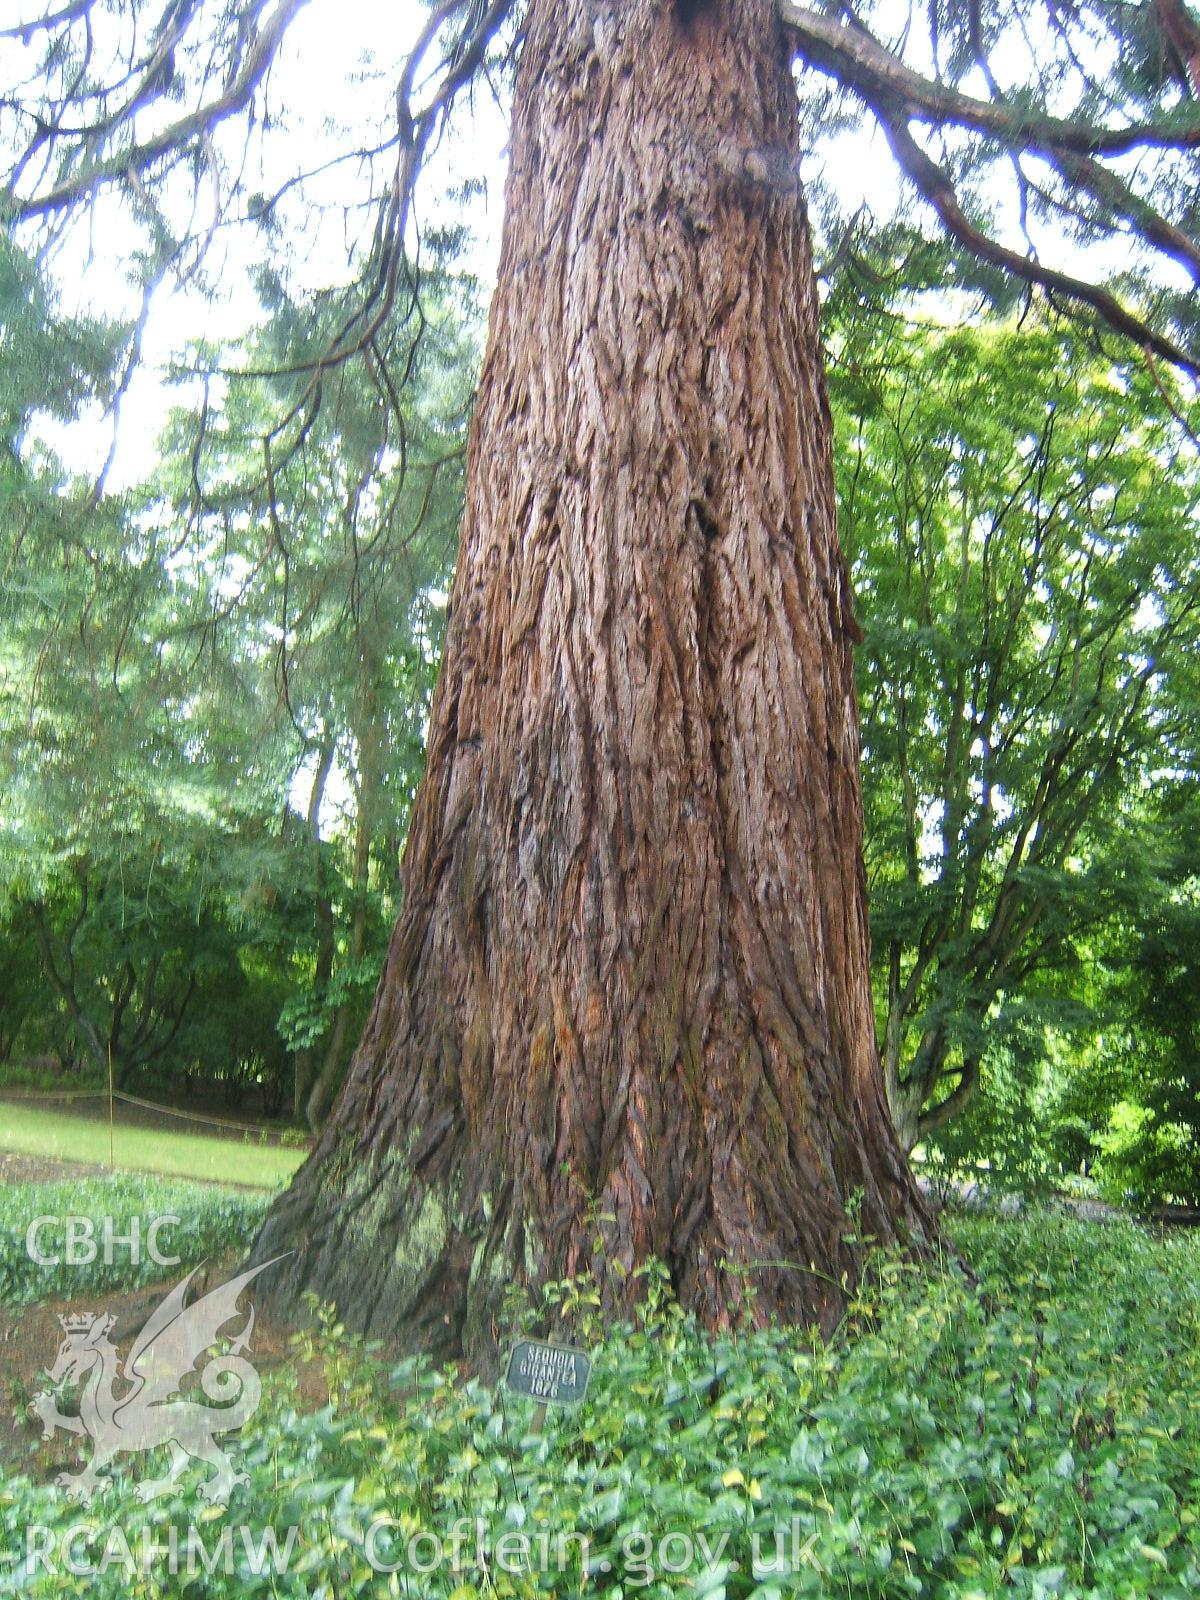 1876 Sequoia Gigantea as labelled above south edge of Dell.